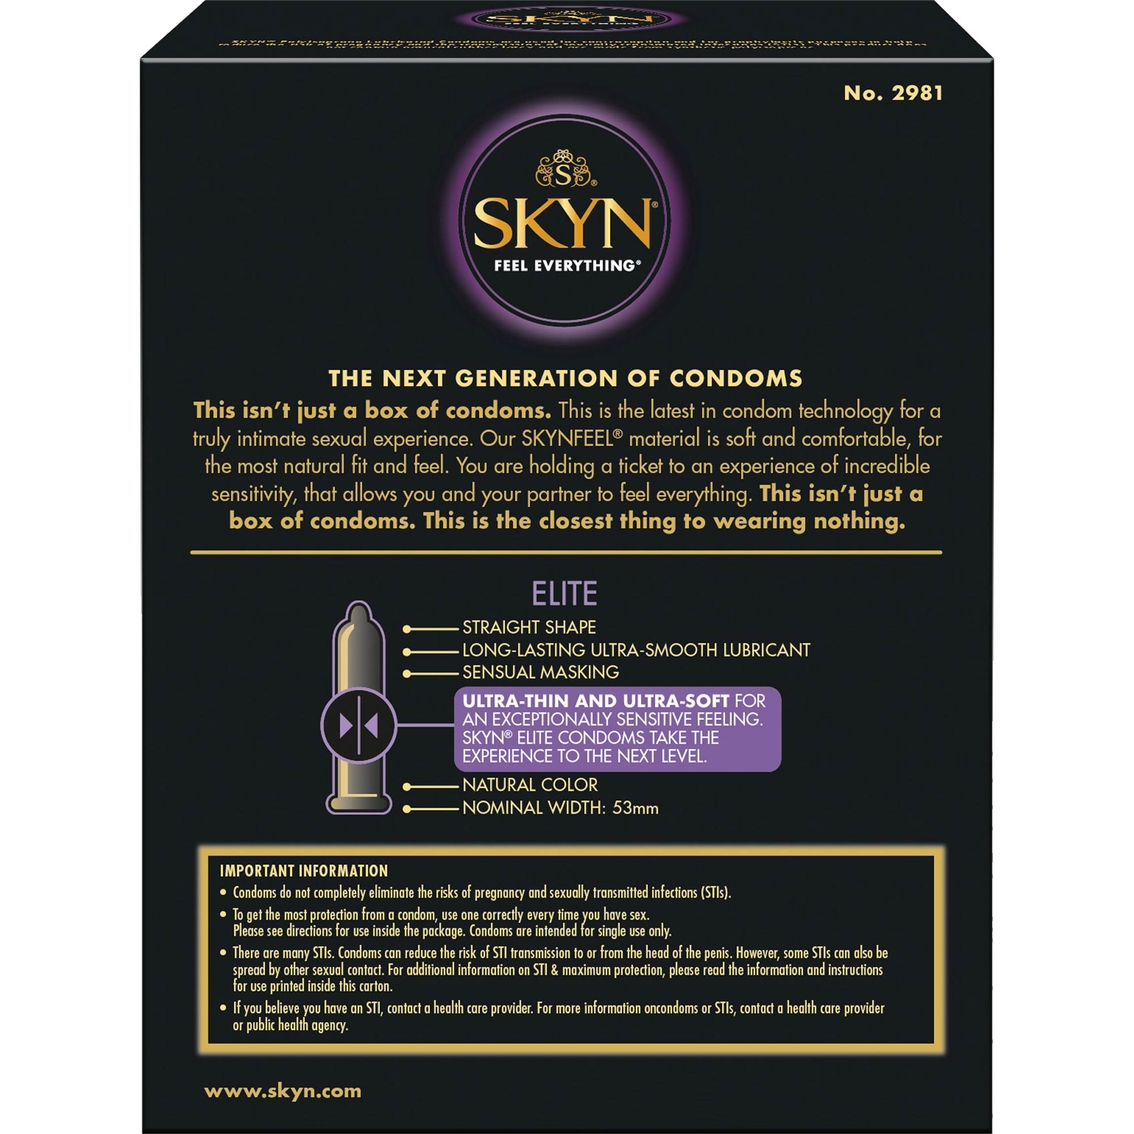 LifeStyles Skyn Elite Non Latex Lubricated Condoms - Image 2 of 2